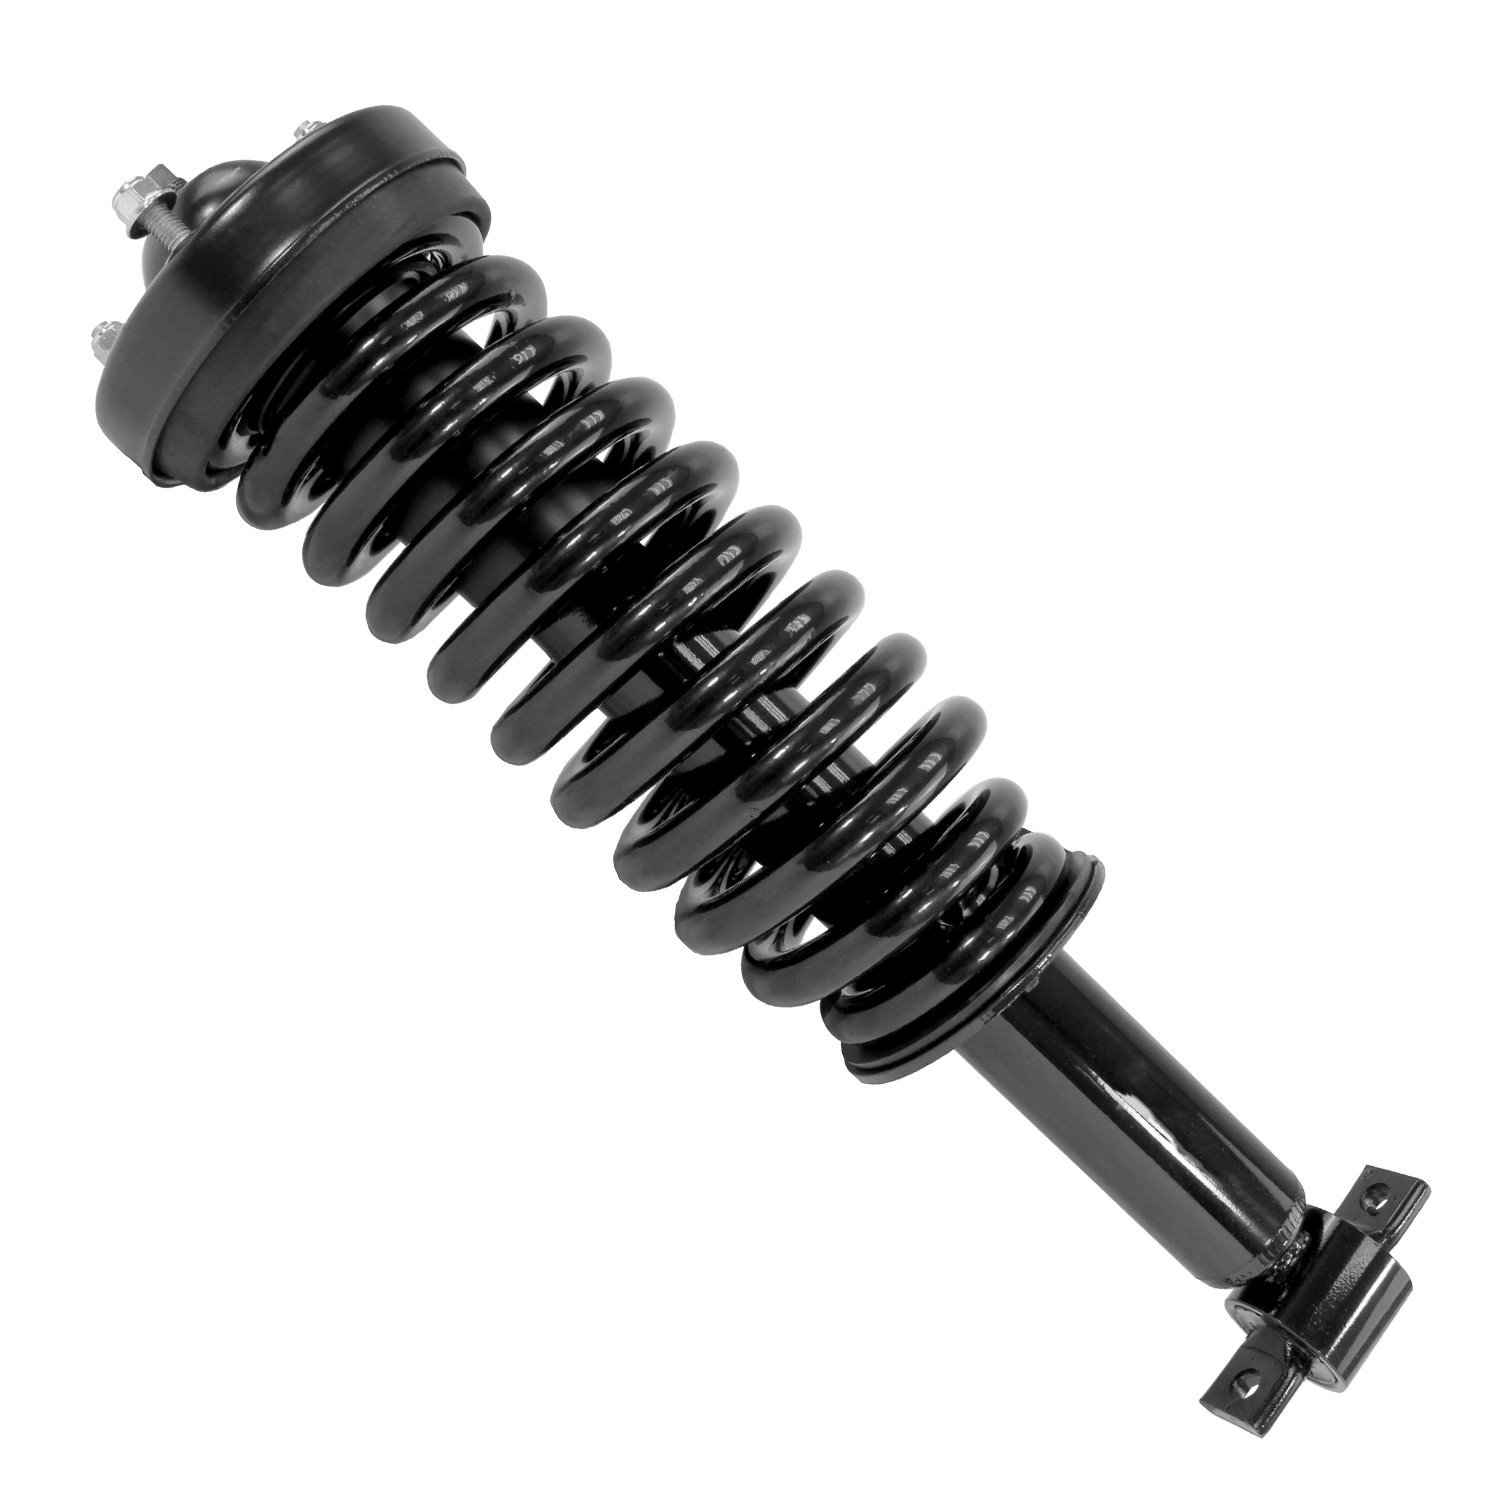 13530 Front Suspension Strut & Coil Spring Assemby Fits Select Ford Expedition, Lincoln Navigator